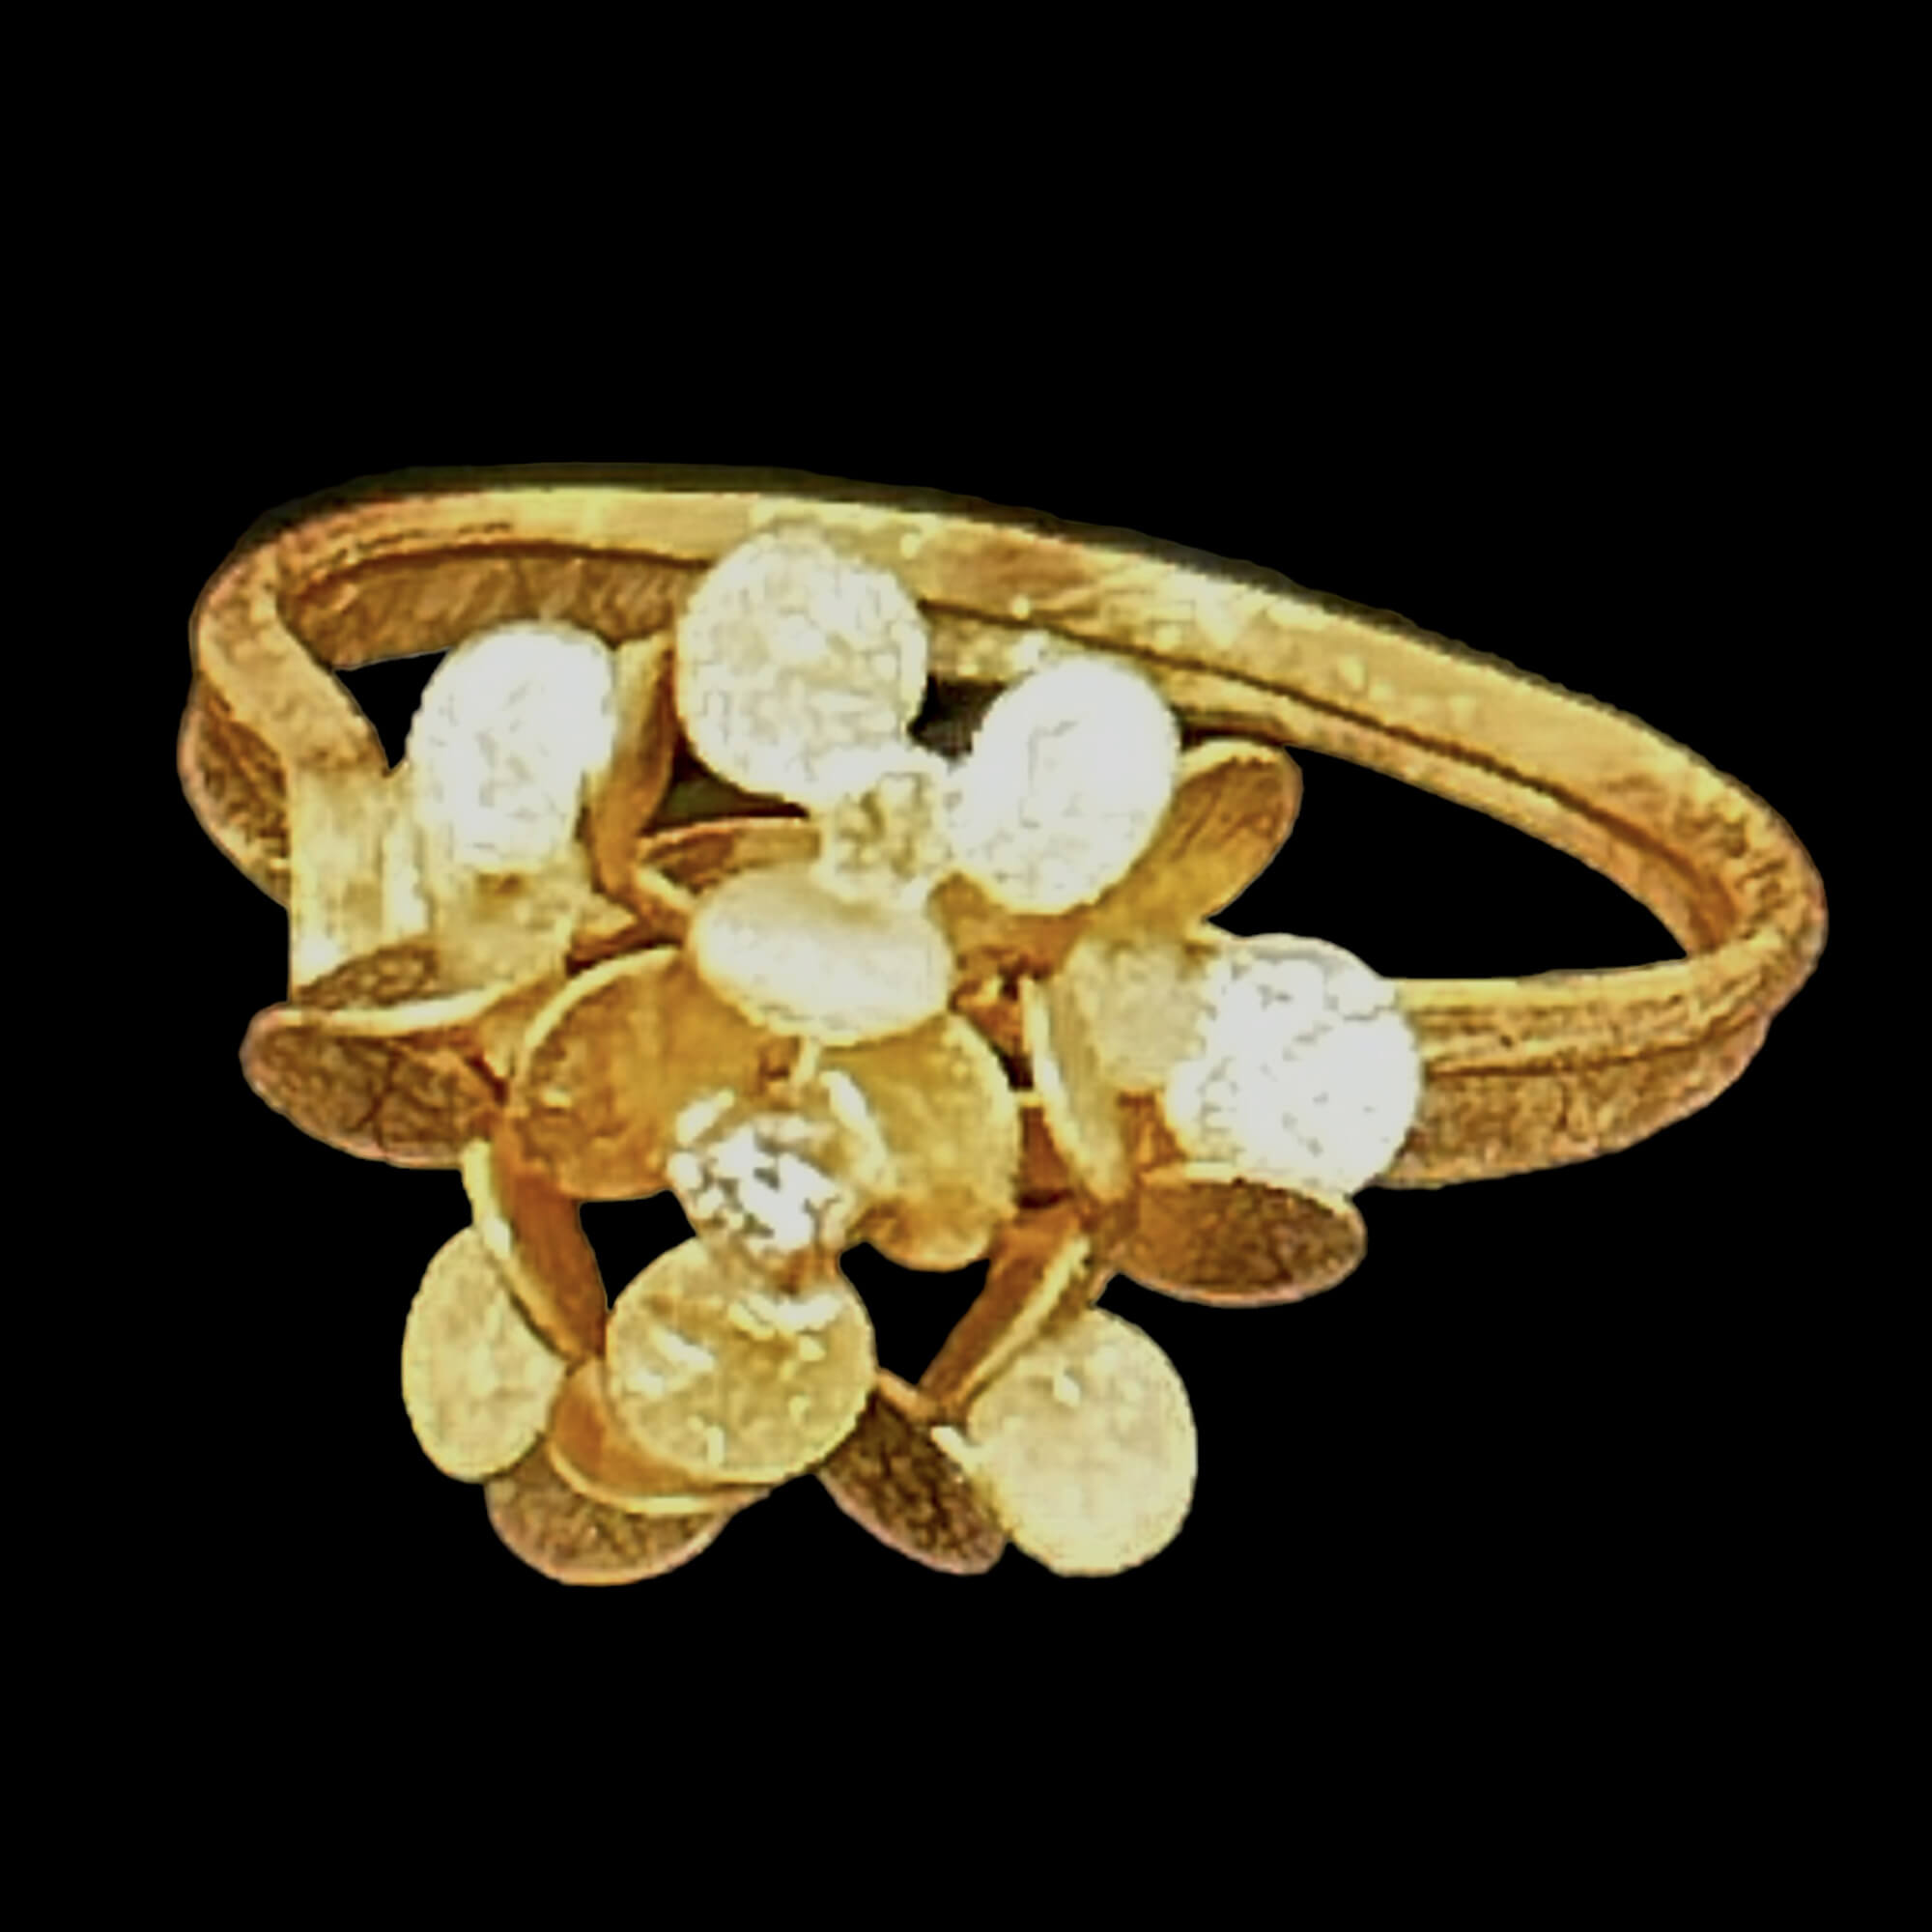 Refined 18kt gold flower ring with a diamond